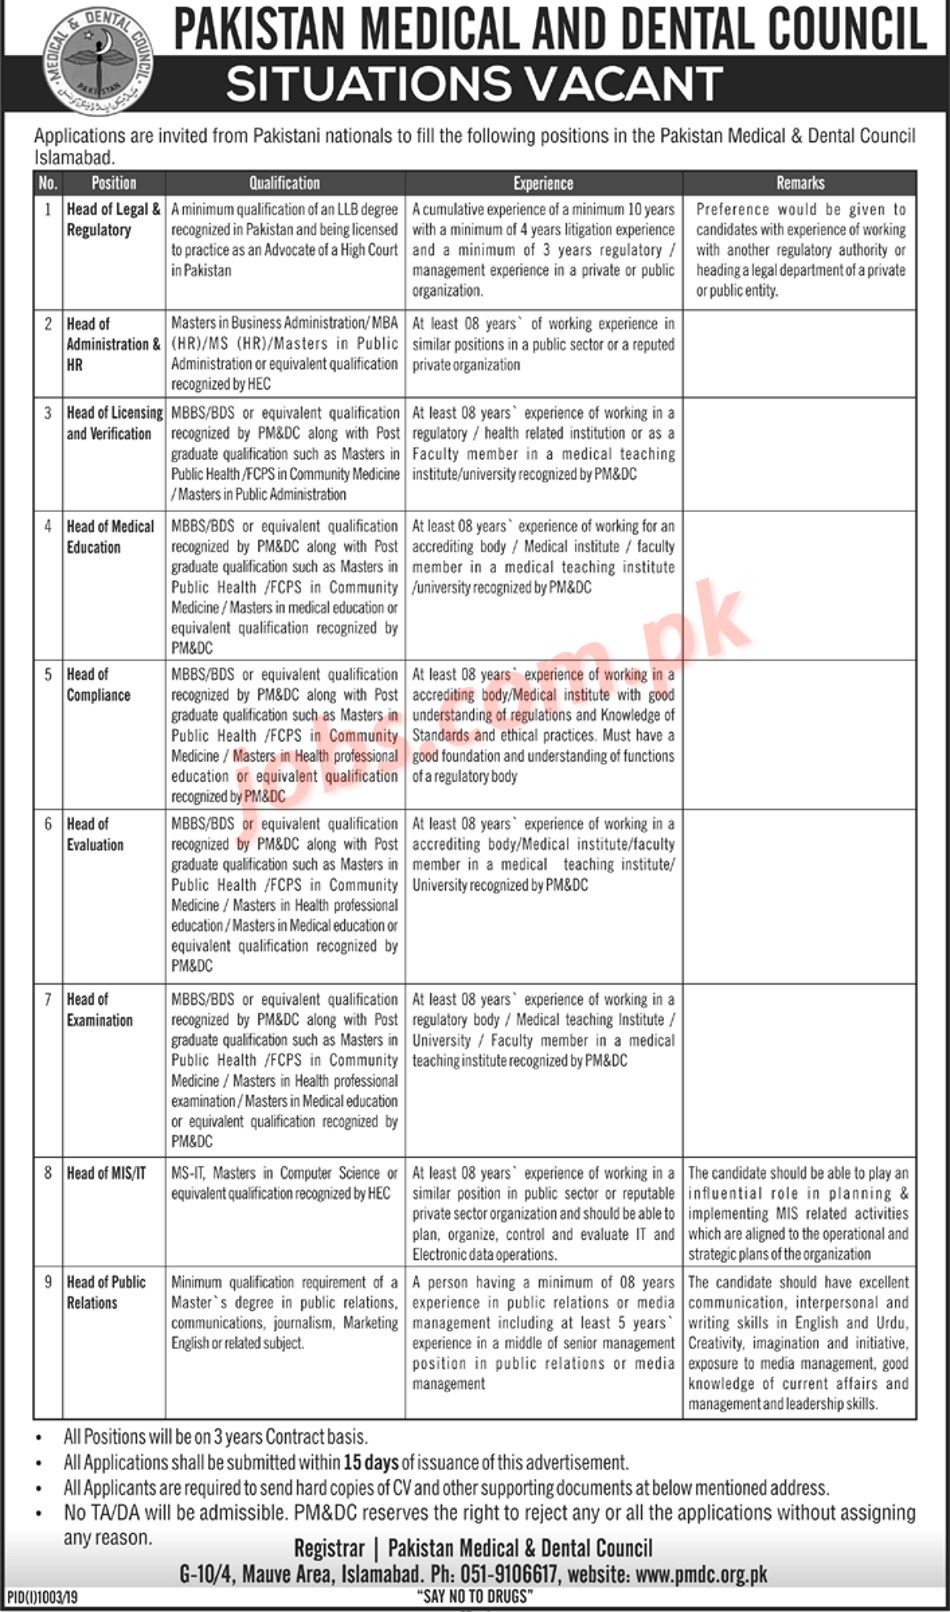 Pakistan Medical & Dental Council (PMDC) Islamabad Jobs 2019 for HR, Admin, Legal, IT, PR & Other Professionals